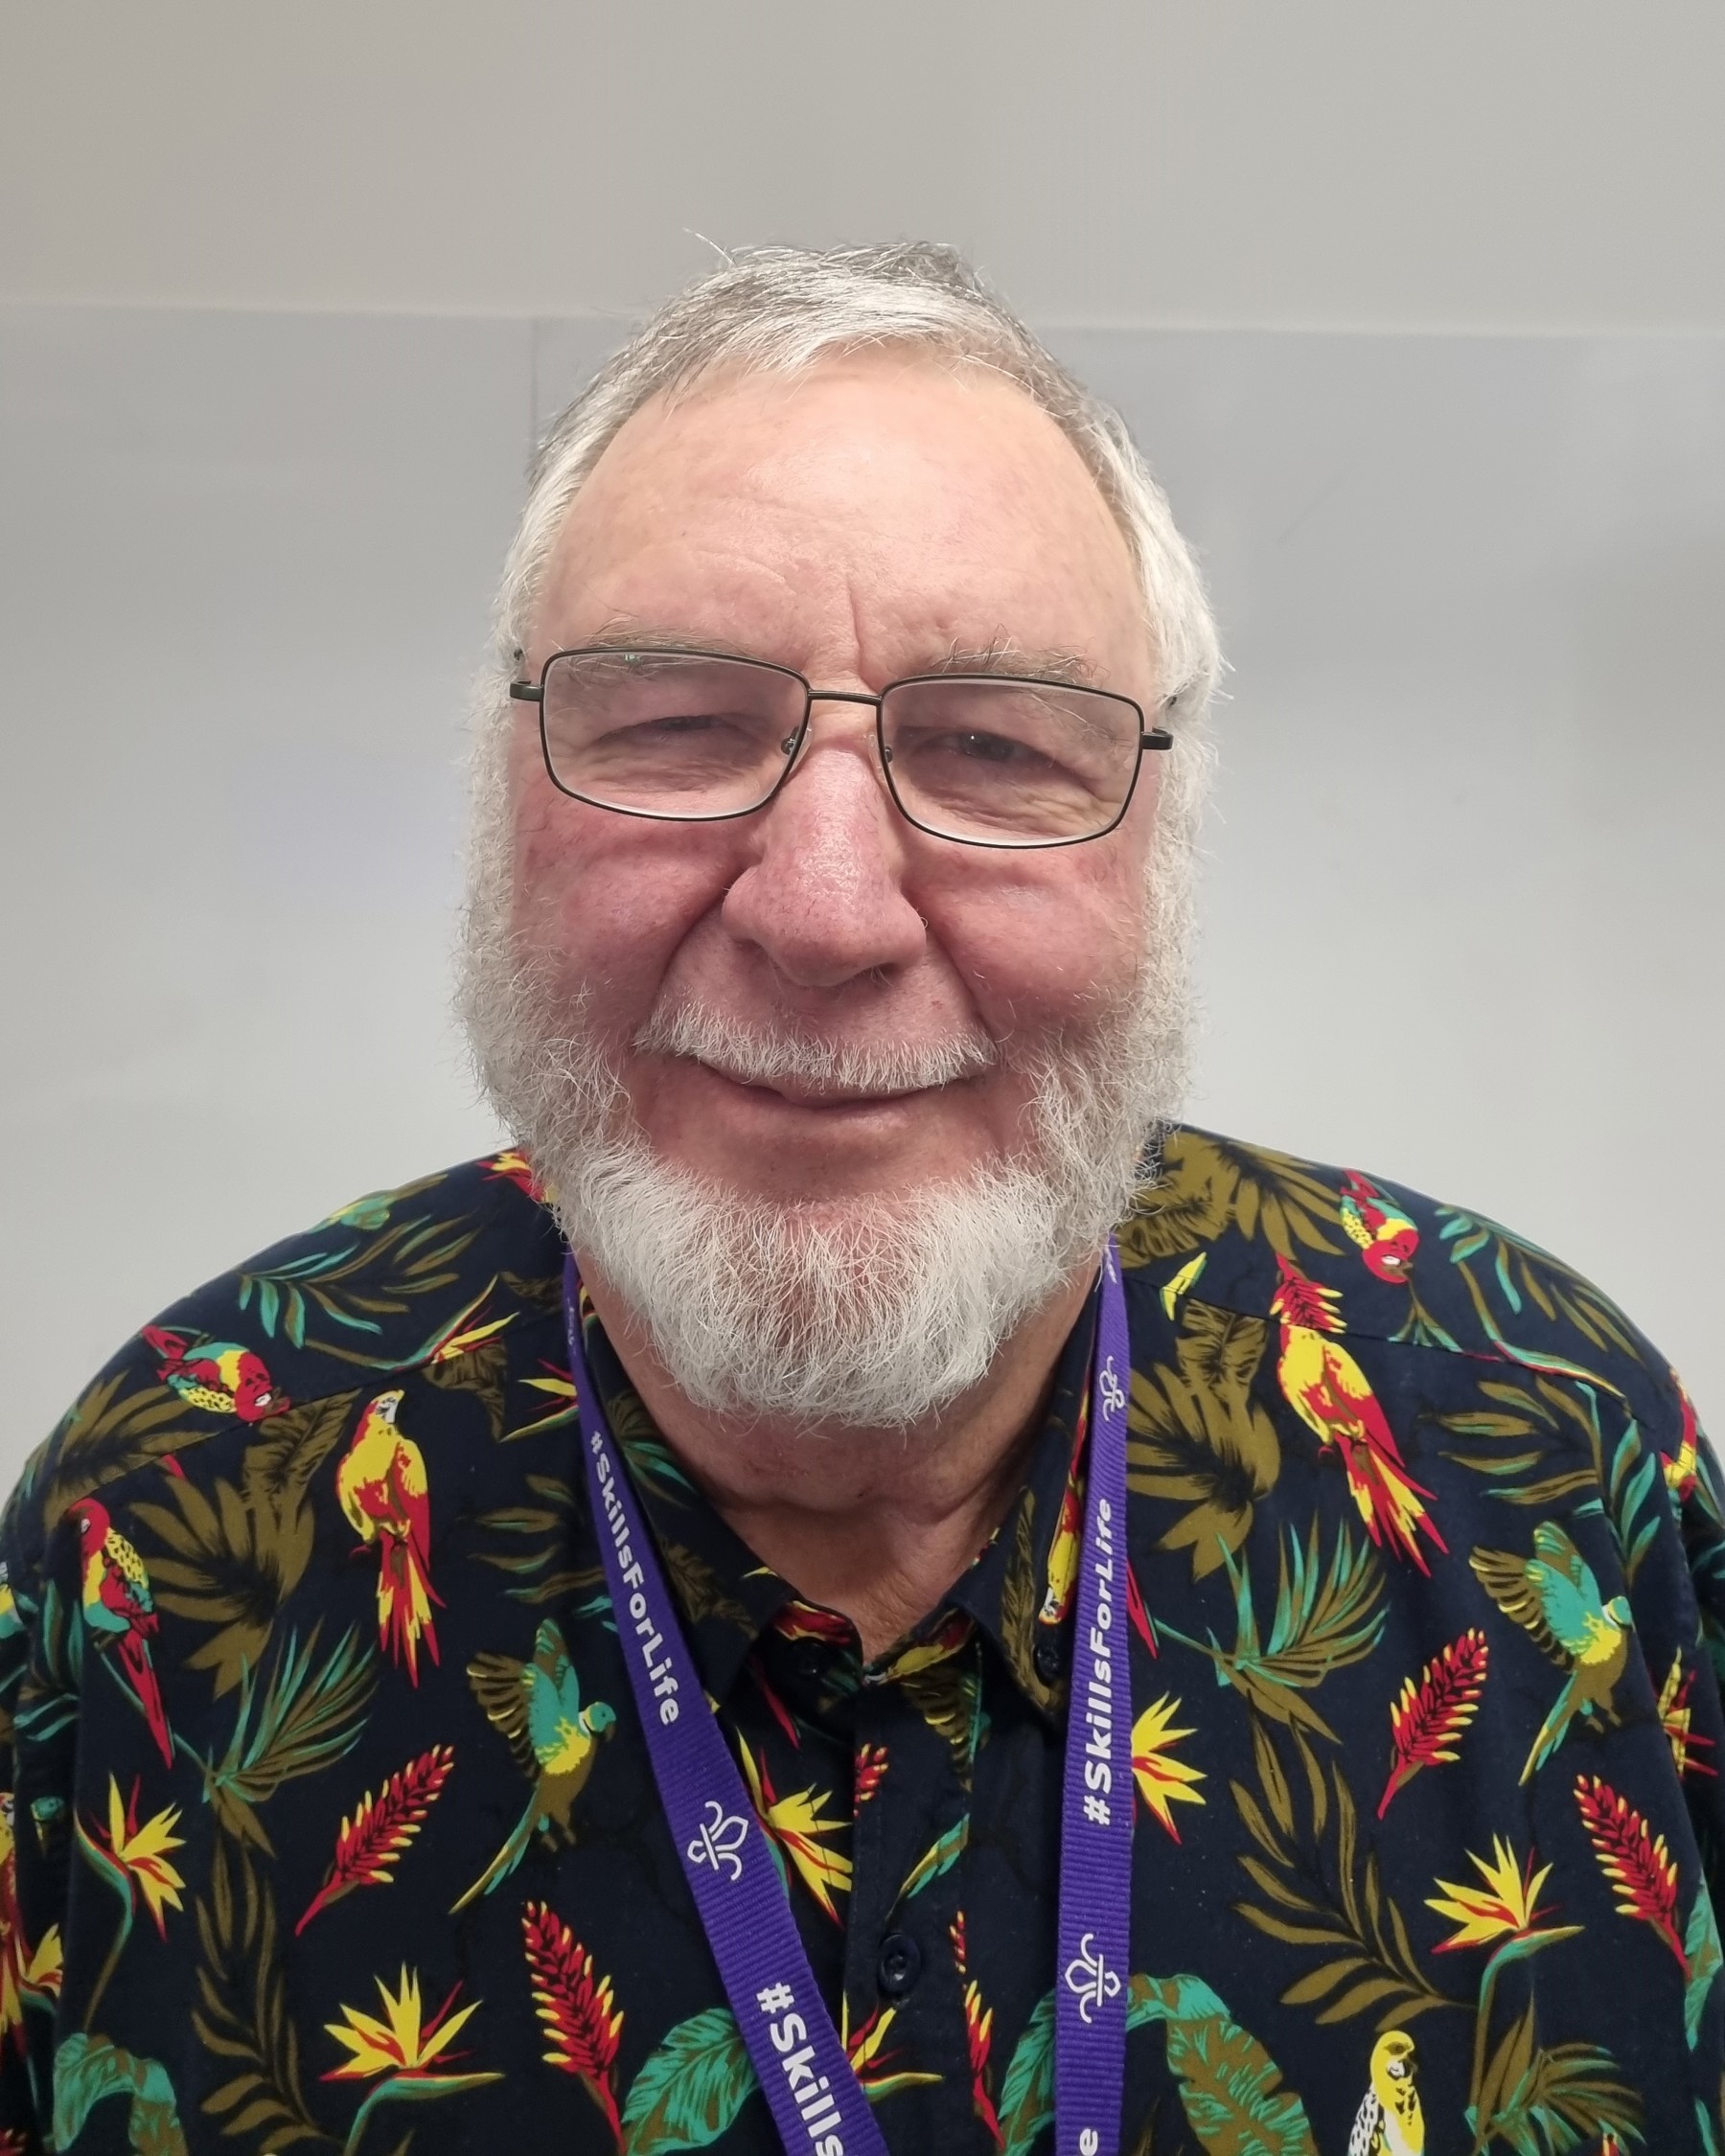 Dirk Grobler smiles at the camera wearing shirt with bright prints of birds and leaves, and a purple Scout lanyard